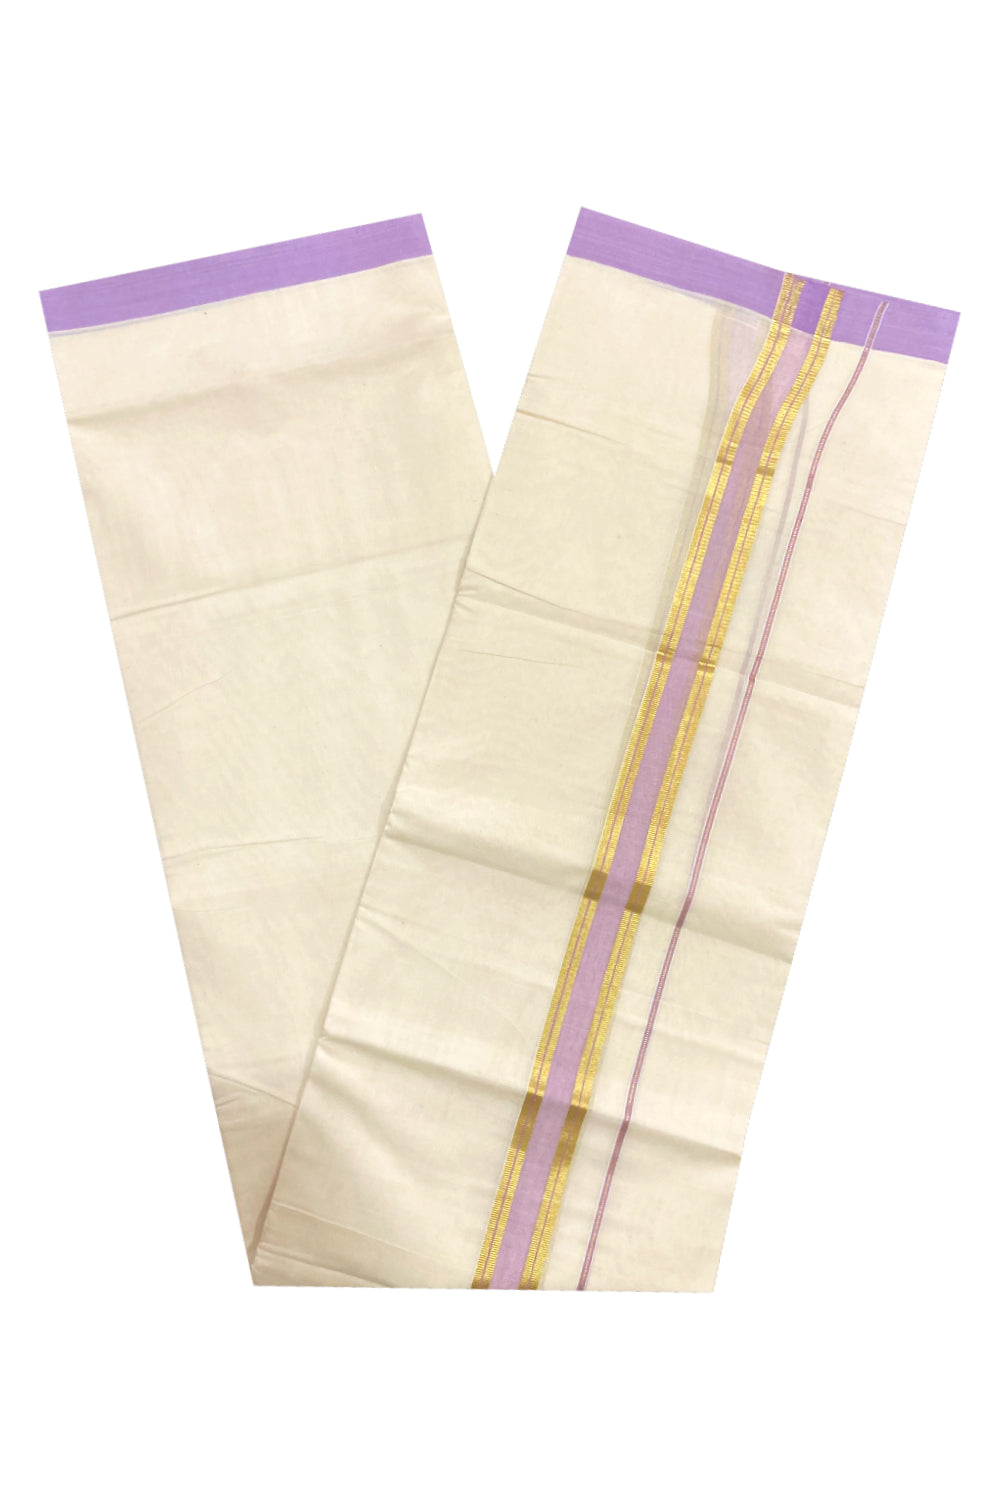 Pure Cotton Off White Double Mundu with Violet and Kasavu Border (South Indian Dhoti)